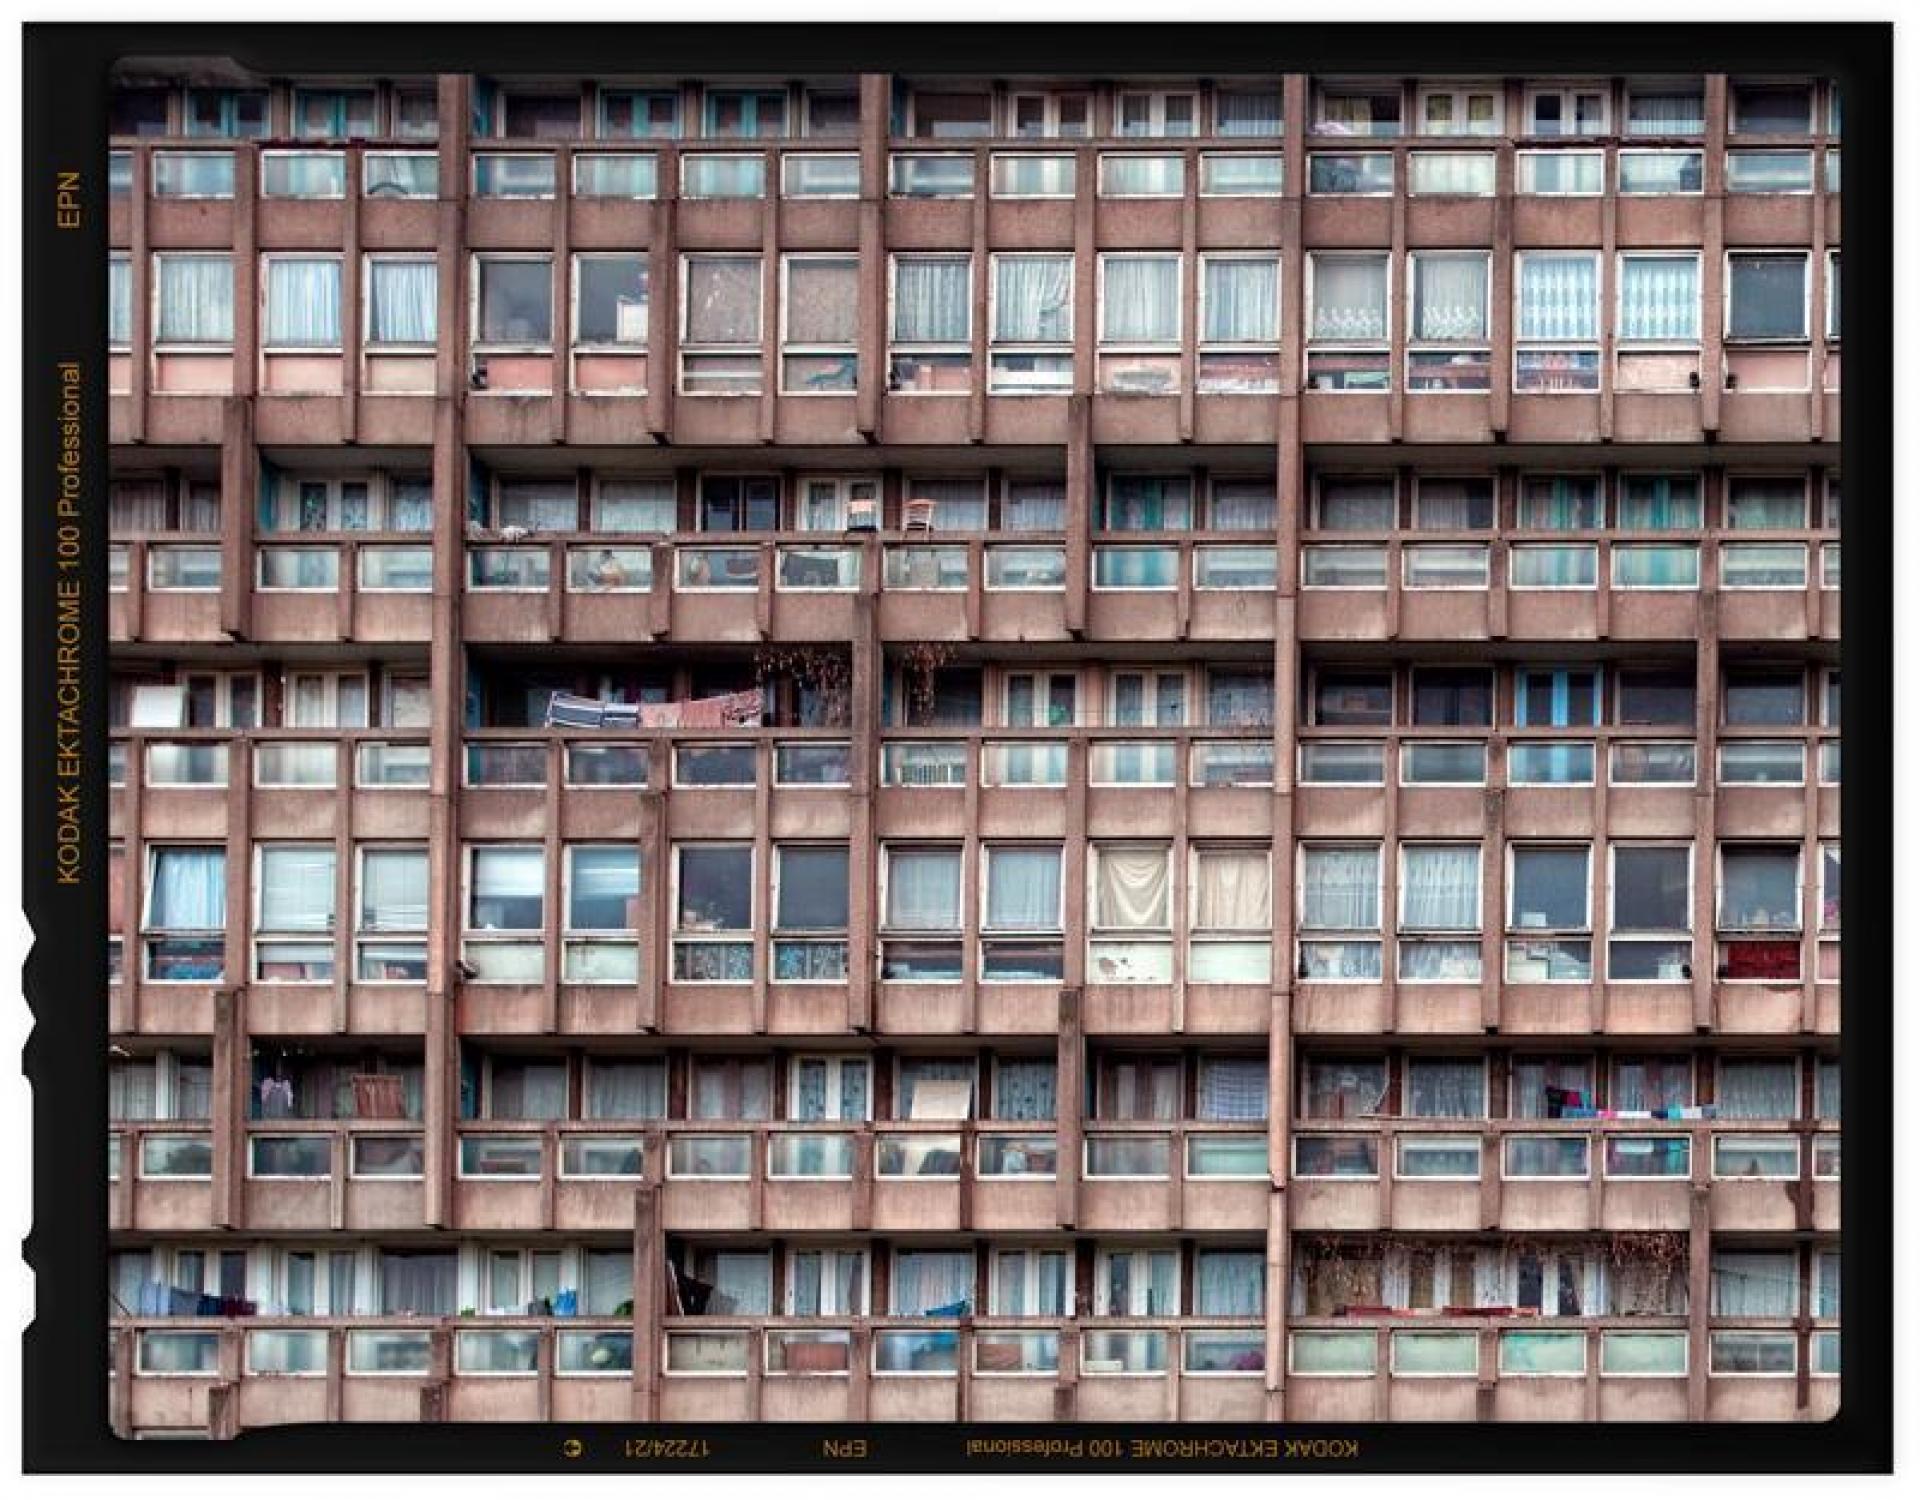 Robin Hood Gardens was an example of the ‘streets in the sky’ concept and a reaction against Le Corbusier’s Unité d'Habitation. | Photo by Rise Hunter